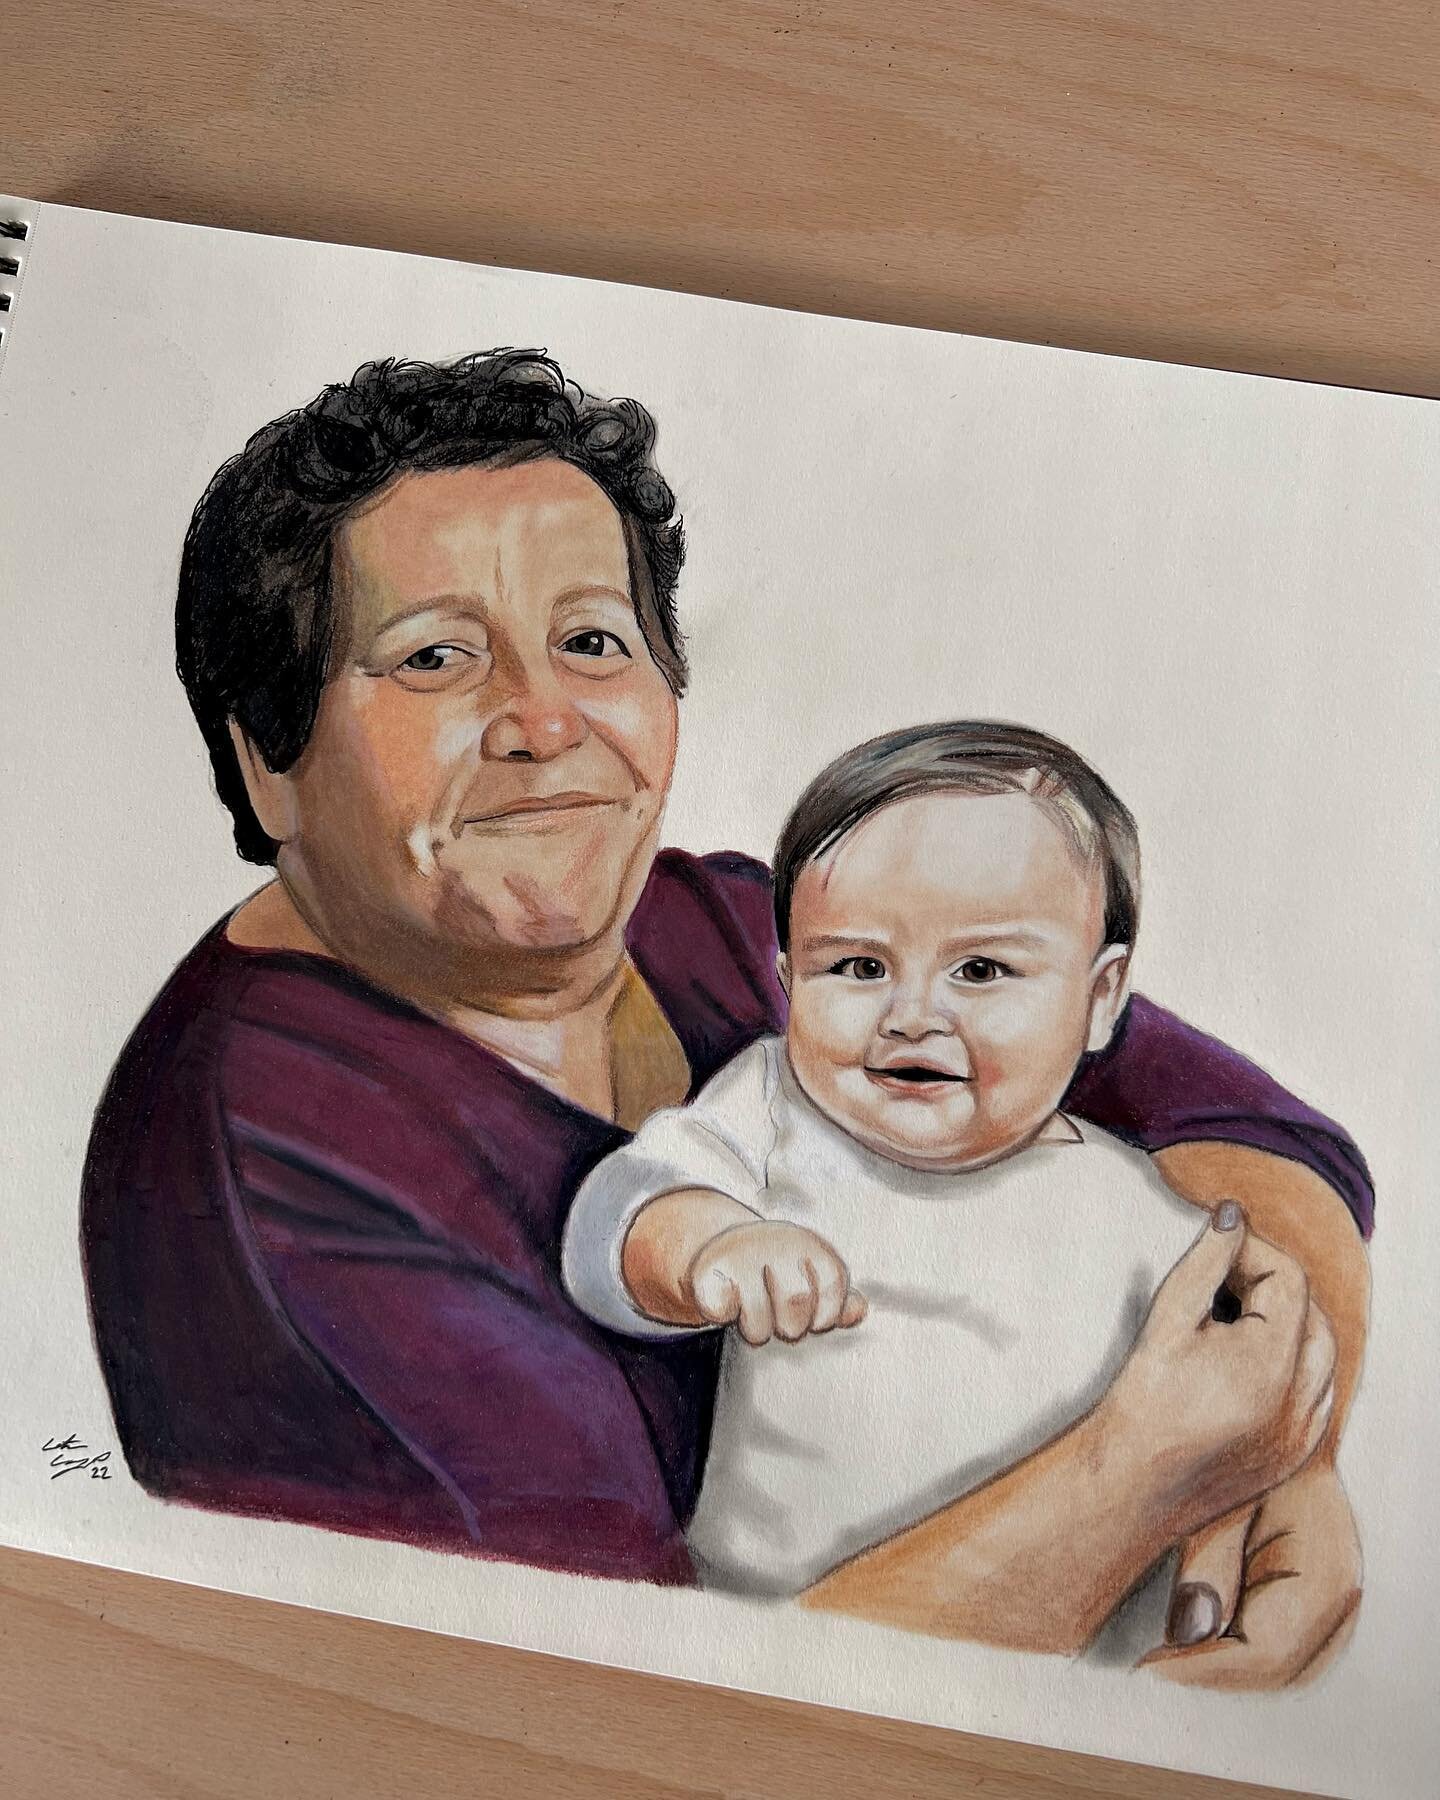 for this piece I was trusted with merging photos together to create a portrait of this sweet little girl and her beautiful grandmother who were sadly never able to meet 🥺 truly an honour to bring these kinds of ideas to life